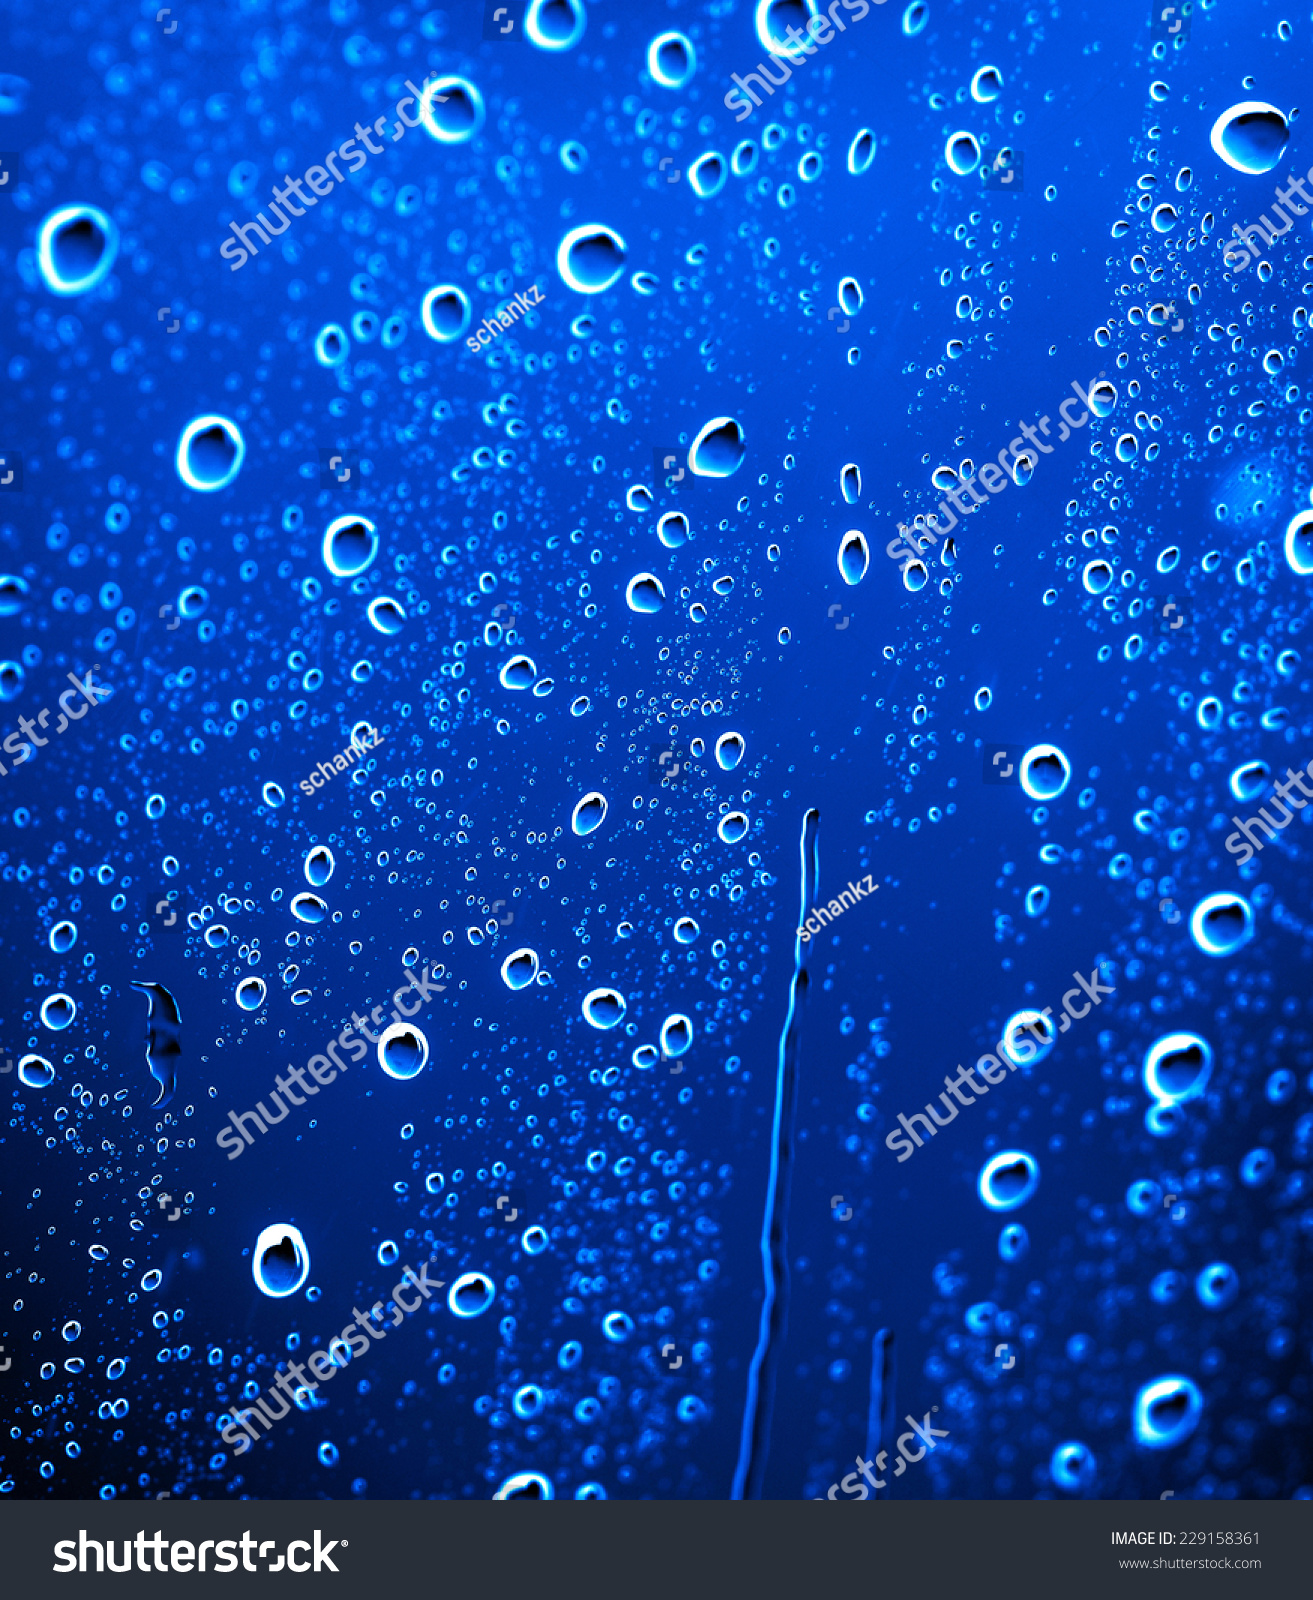 fresh background of water drops on blue surface #229158361